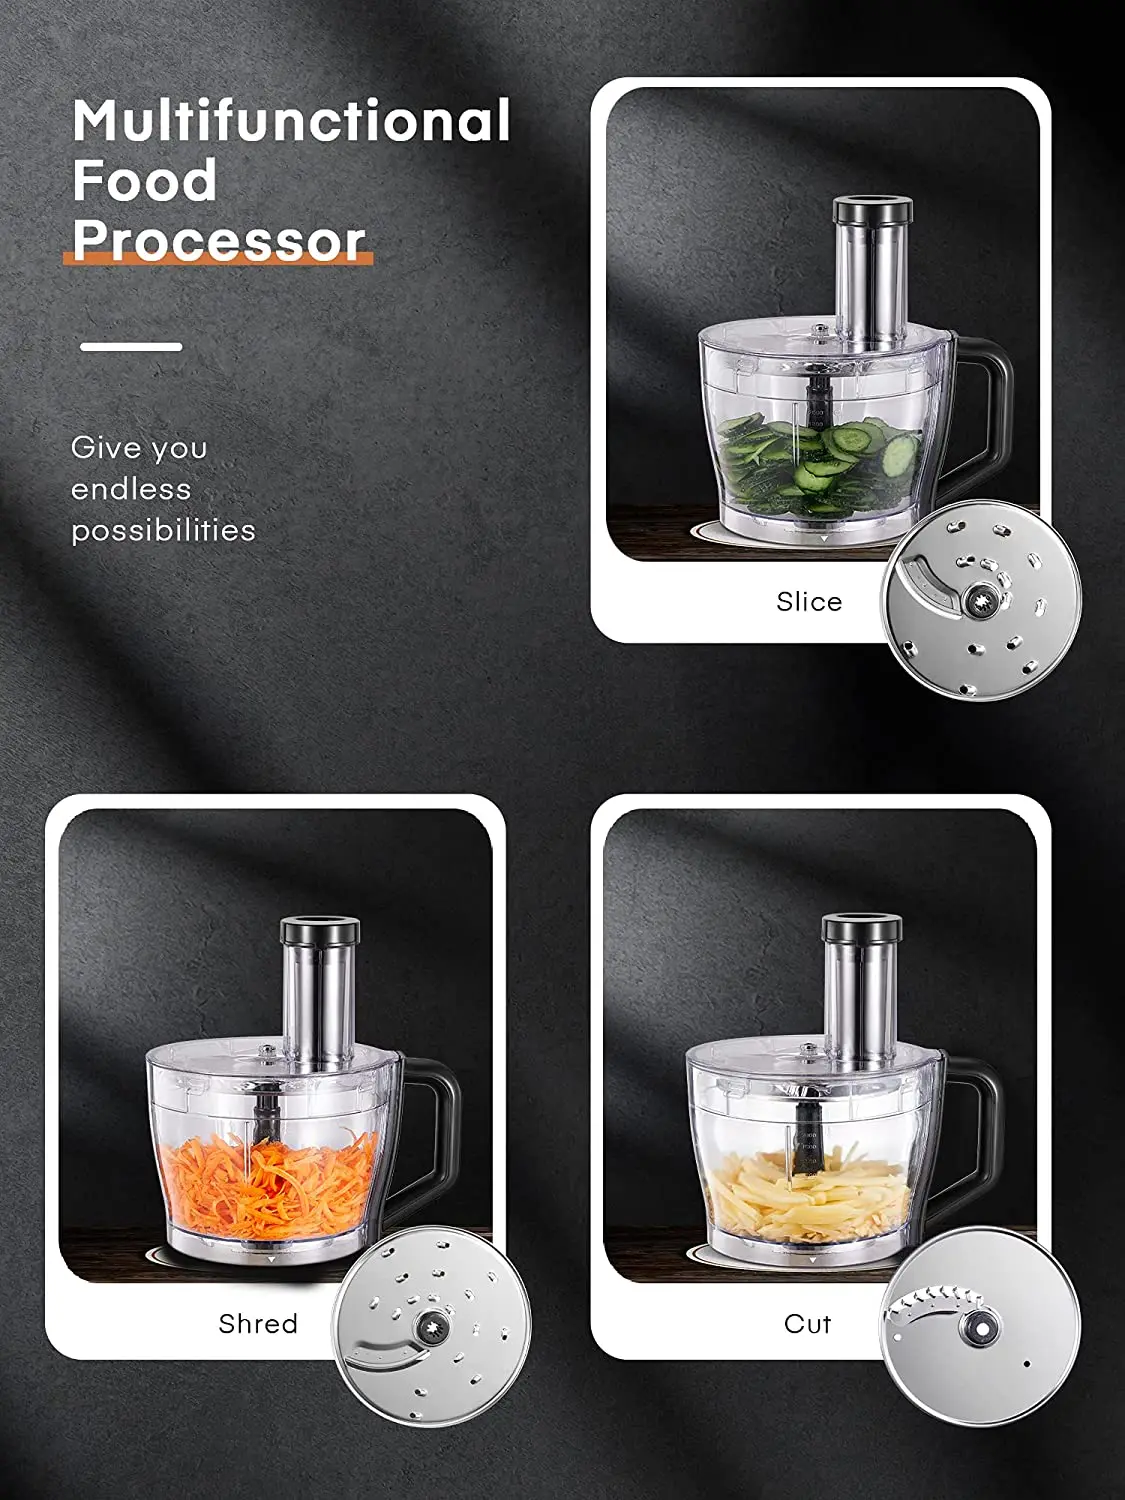 Decen Food Processor Multifunctional 1100W Mixer Food Processor with 3.5 L Bowl and 3 Speed Levels enlarge